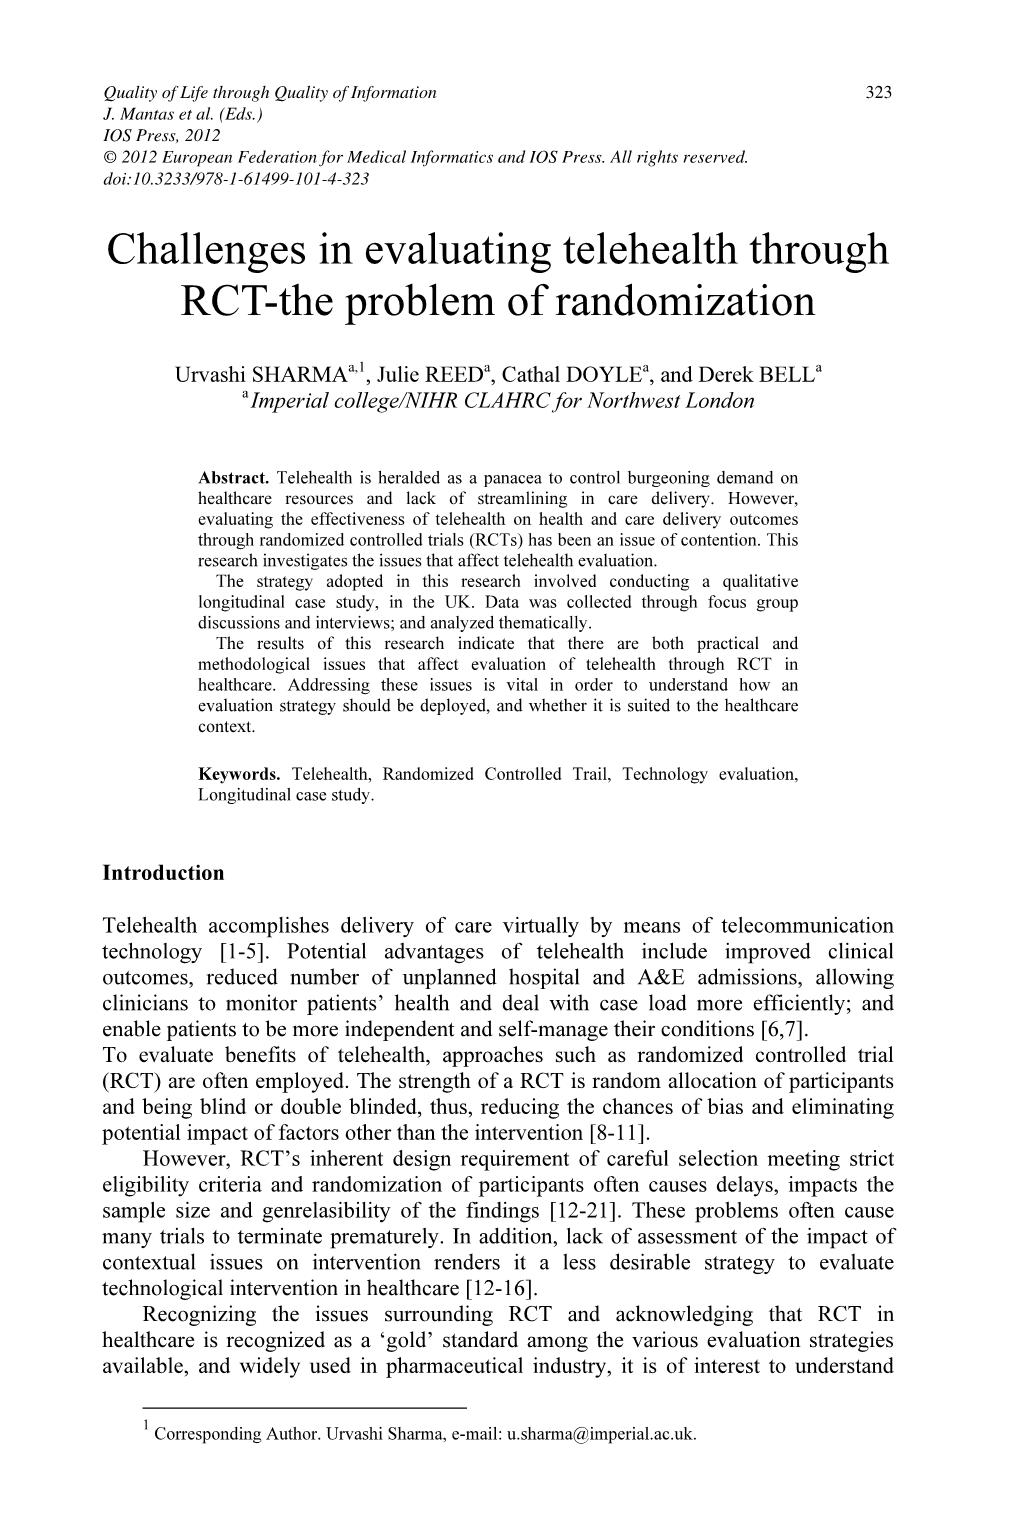 Challenges in Evaluating Telehealth Through RCT-The Problem of Randomization